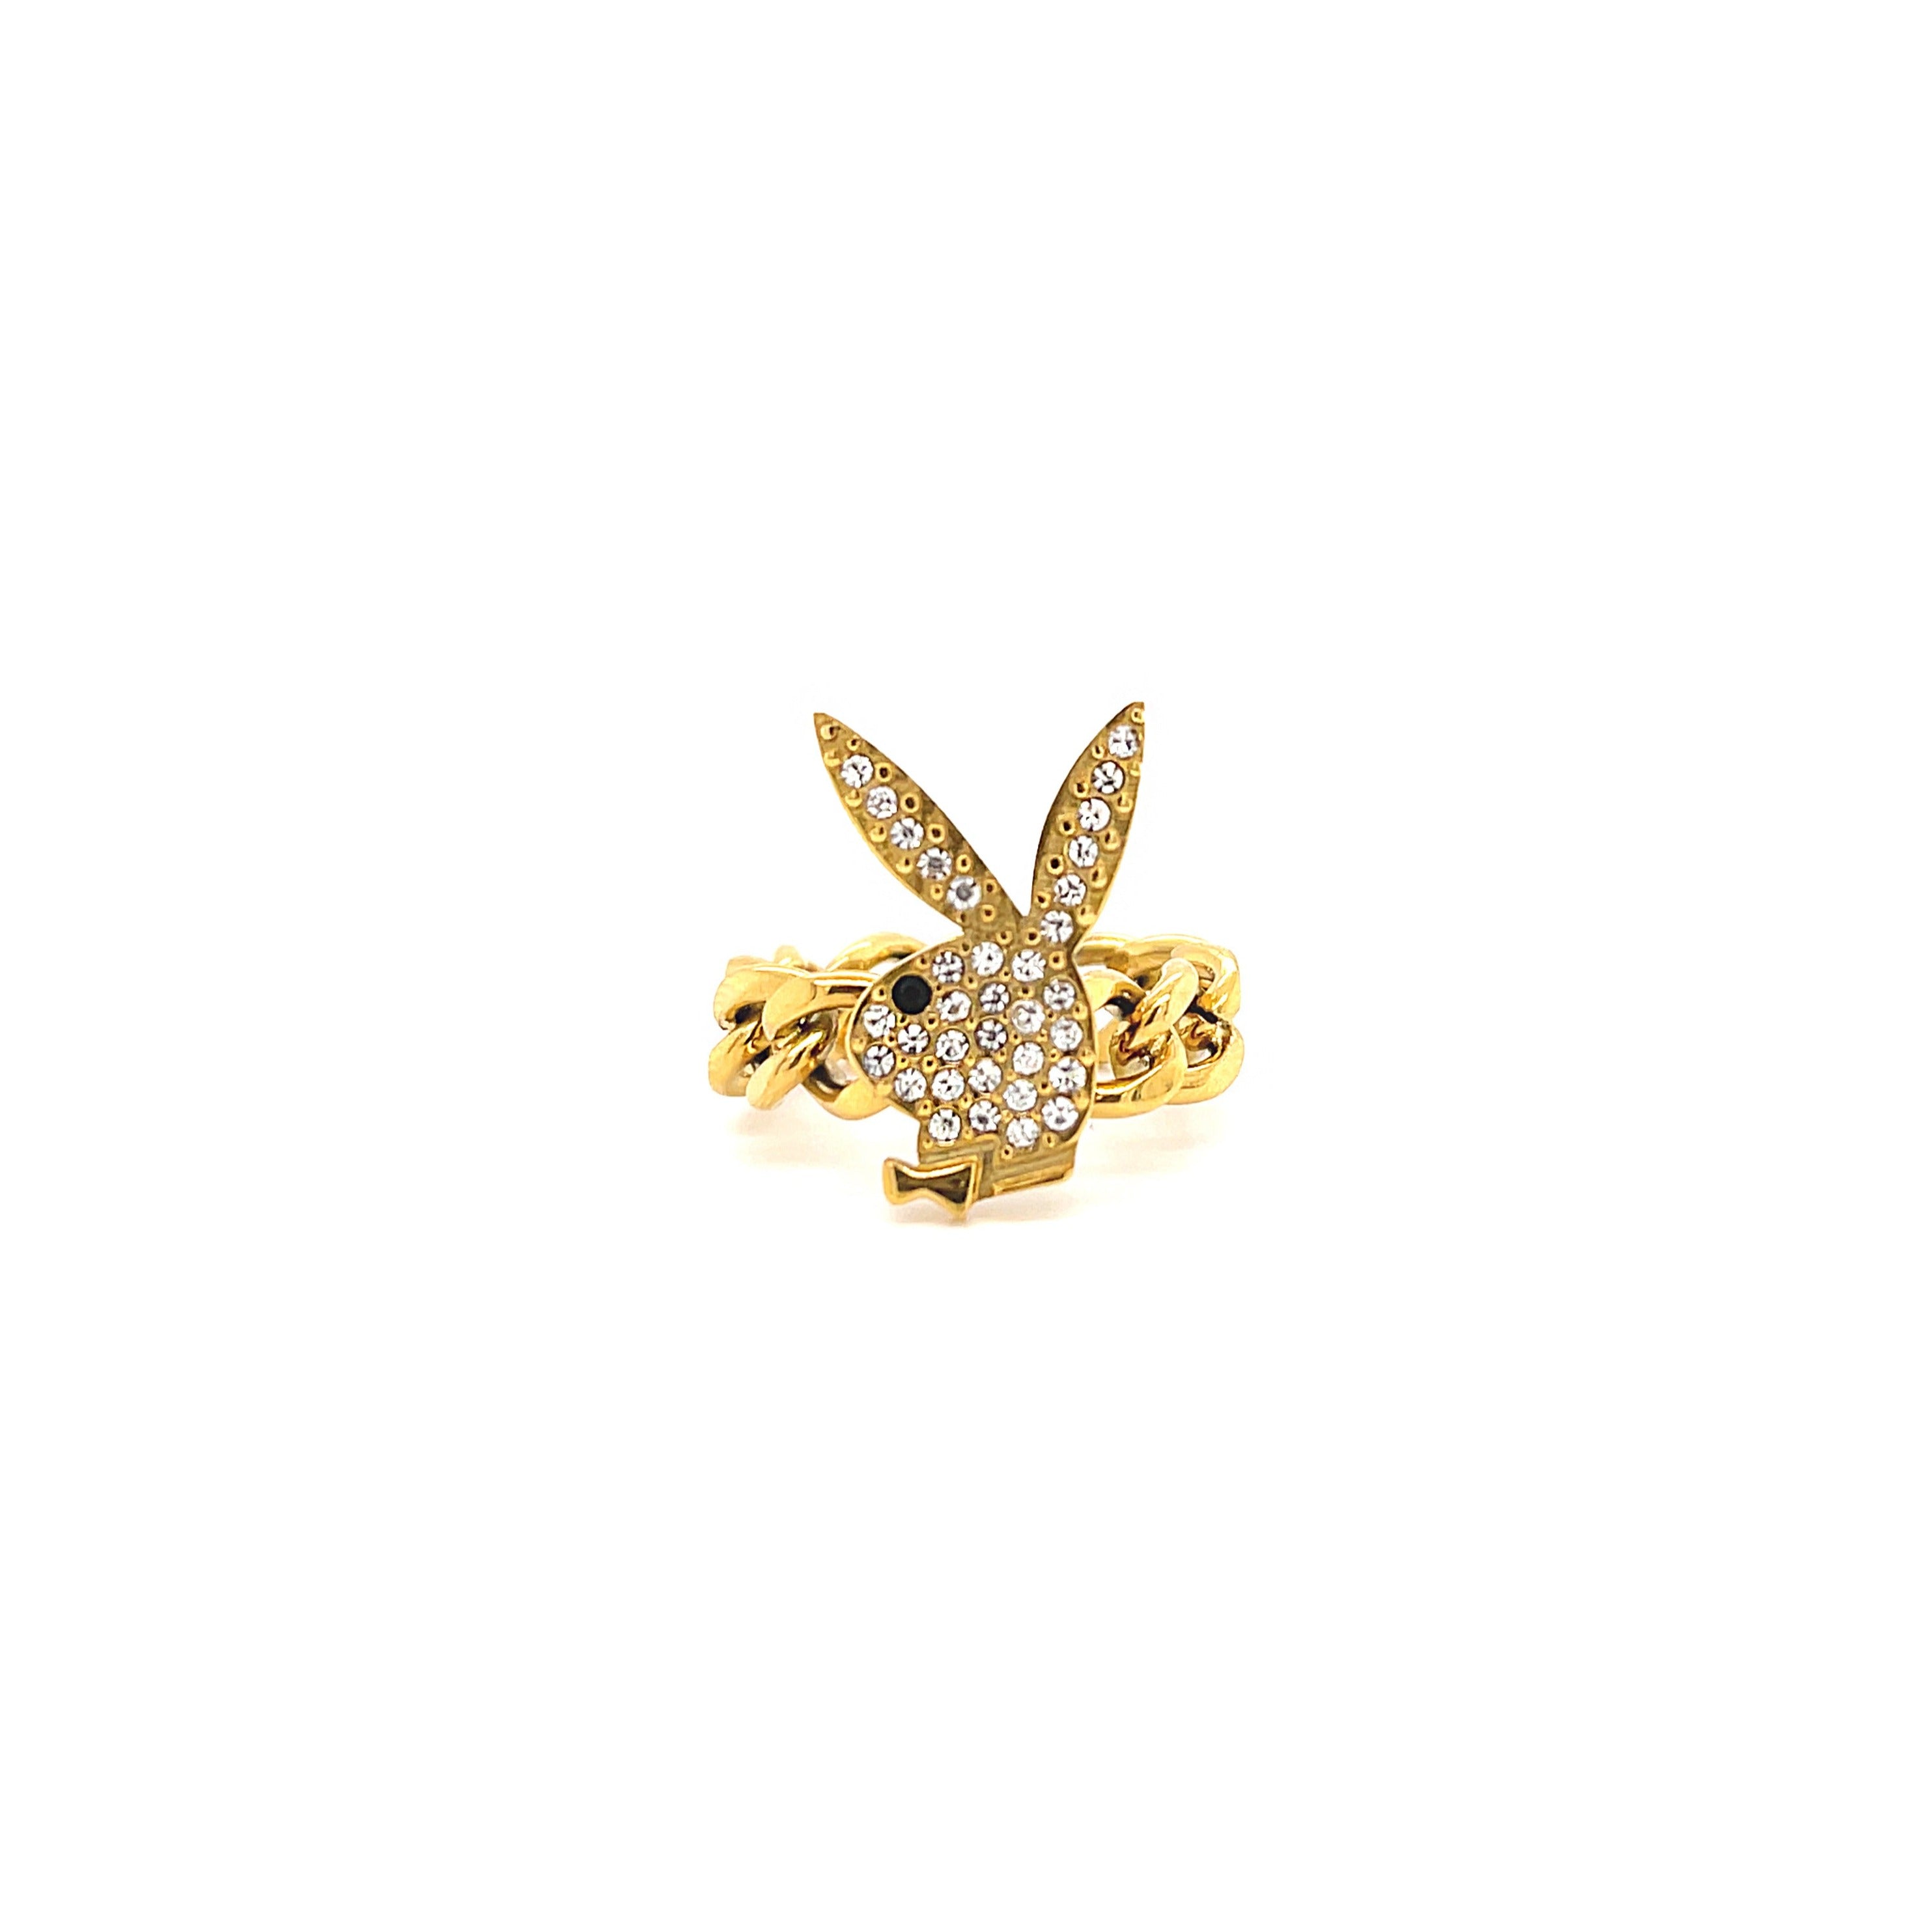 The Playboy Chain Ring